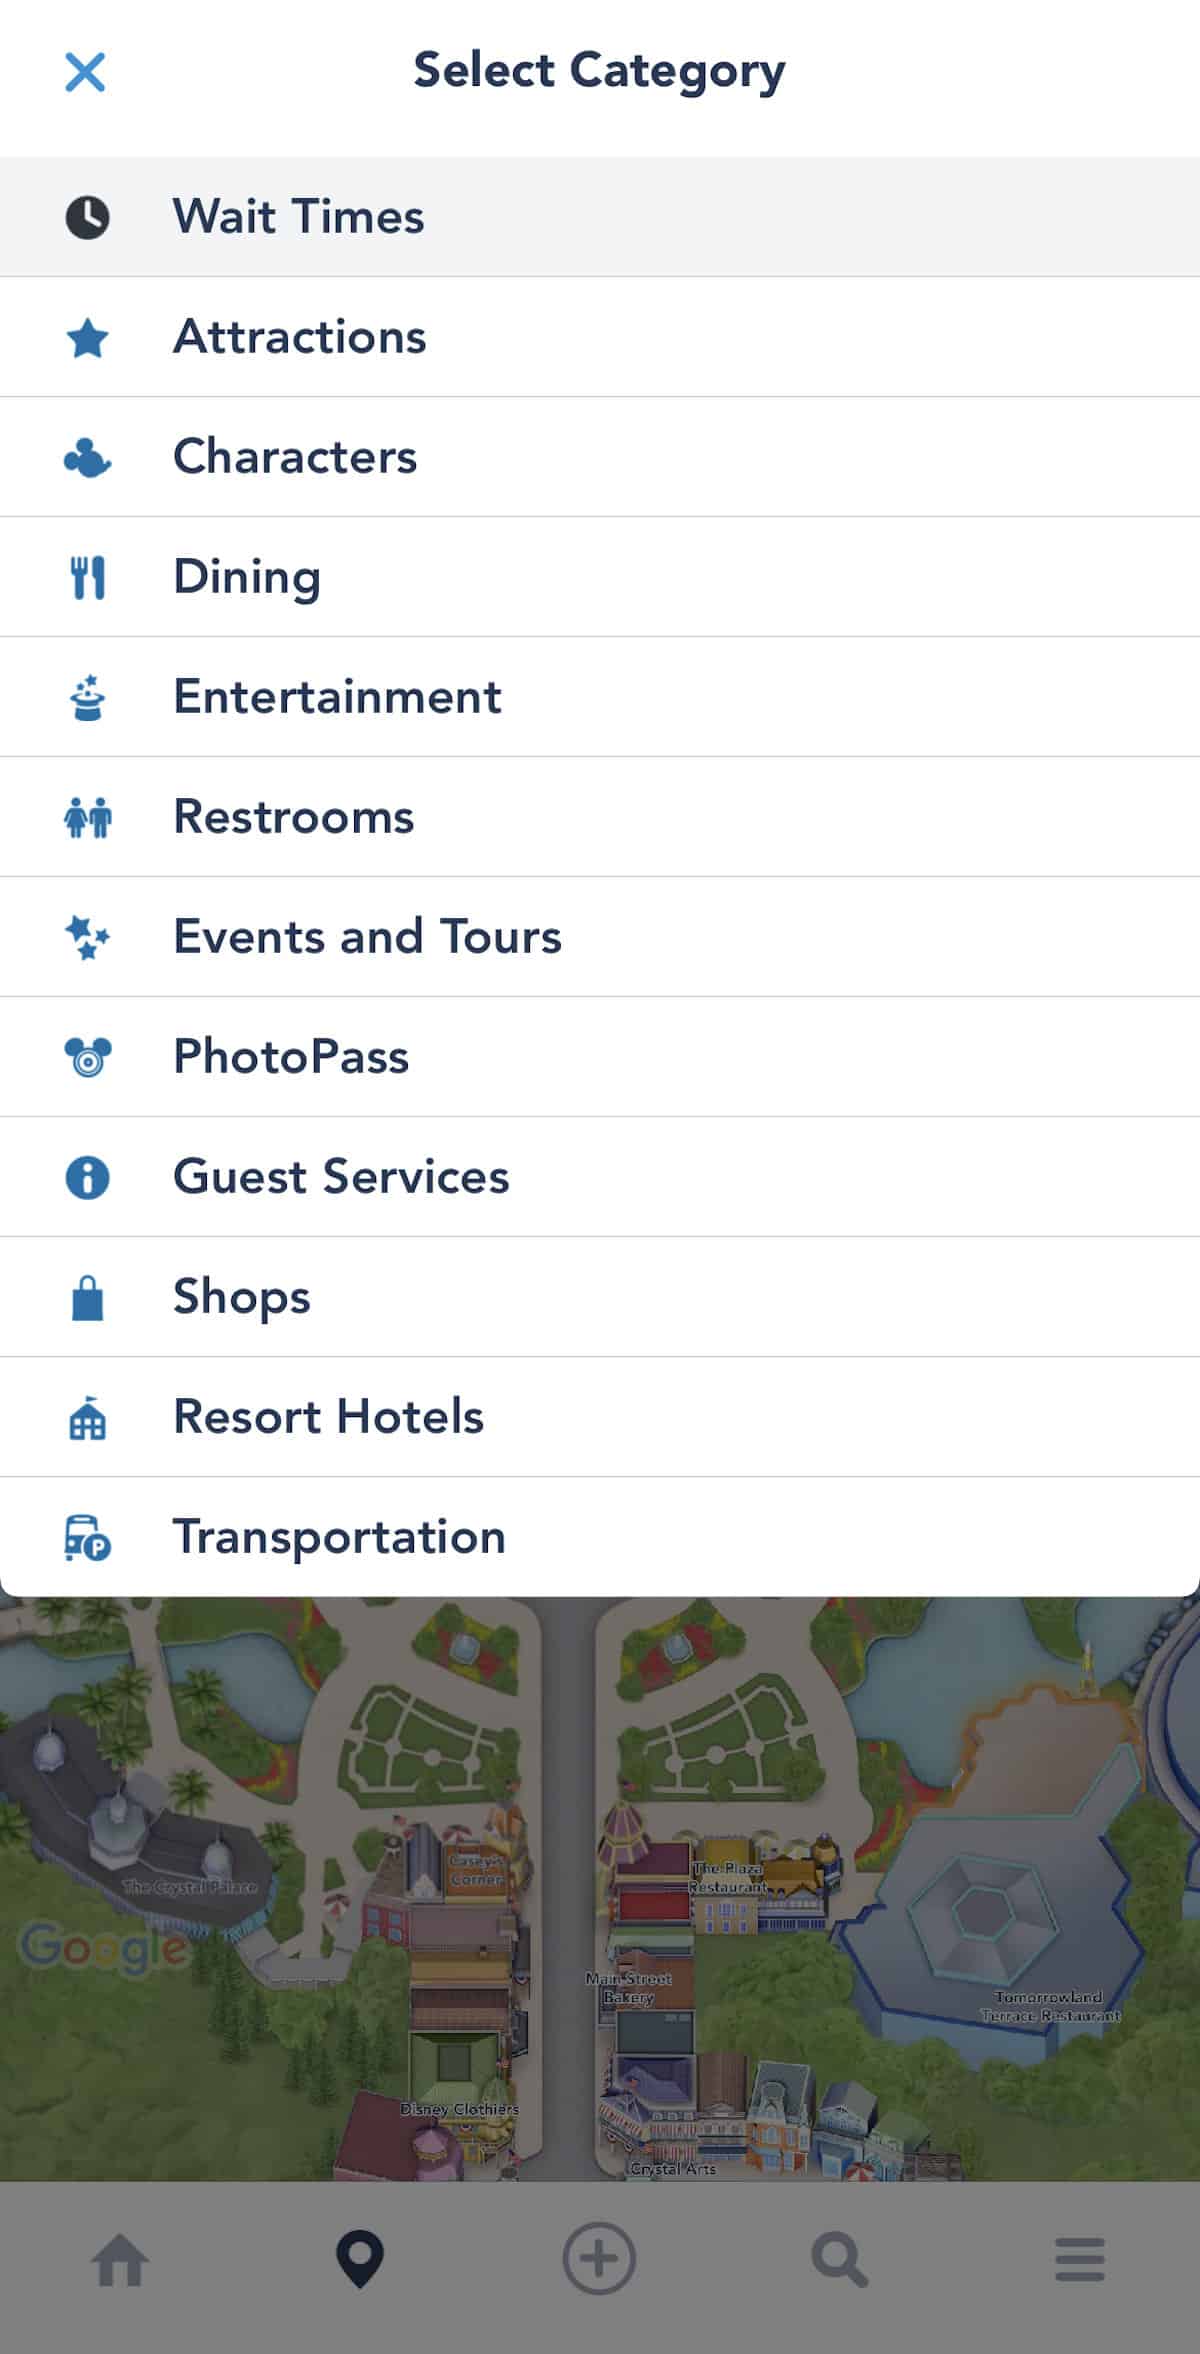 Disney World Character Locator - How to meet characters at Disney World - all the tips for Disney World Character Meet and Greets that you need to know! 